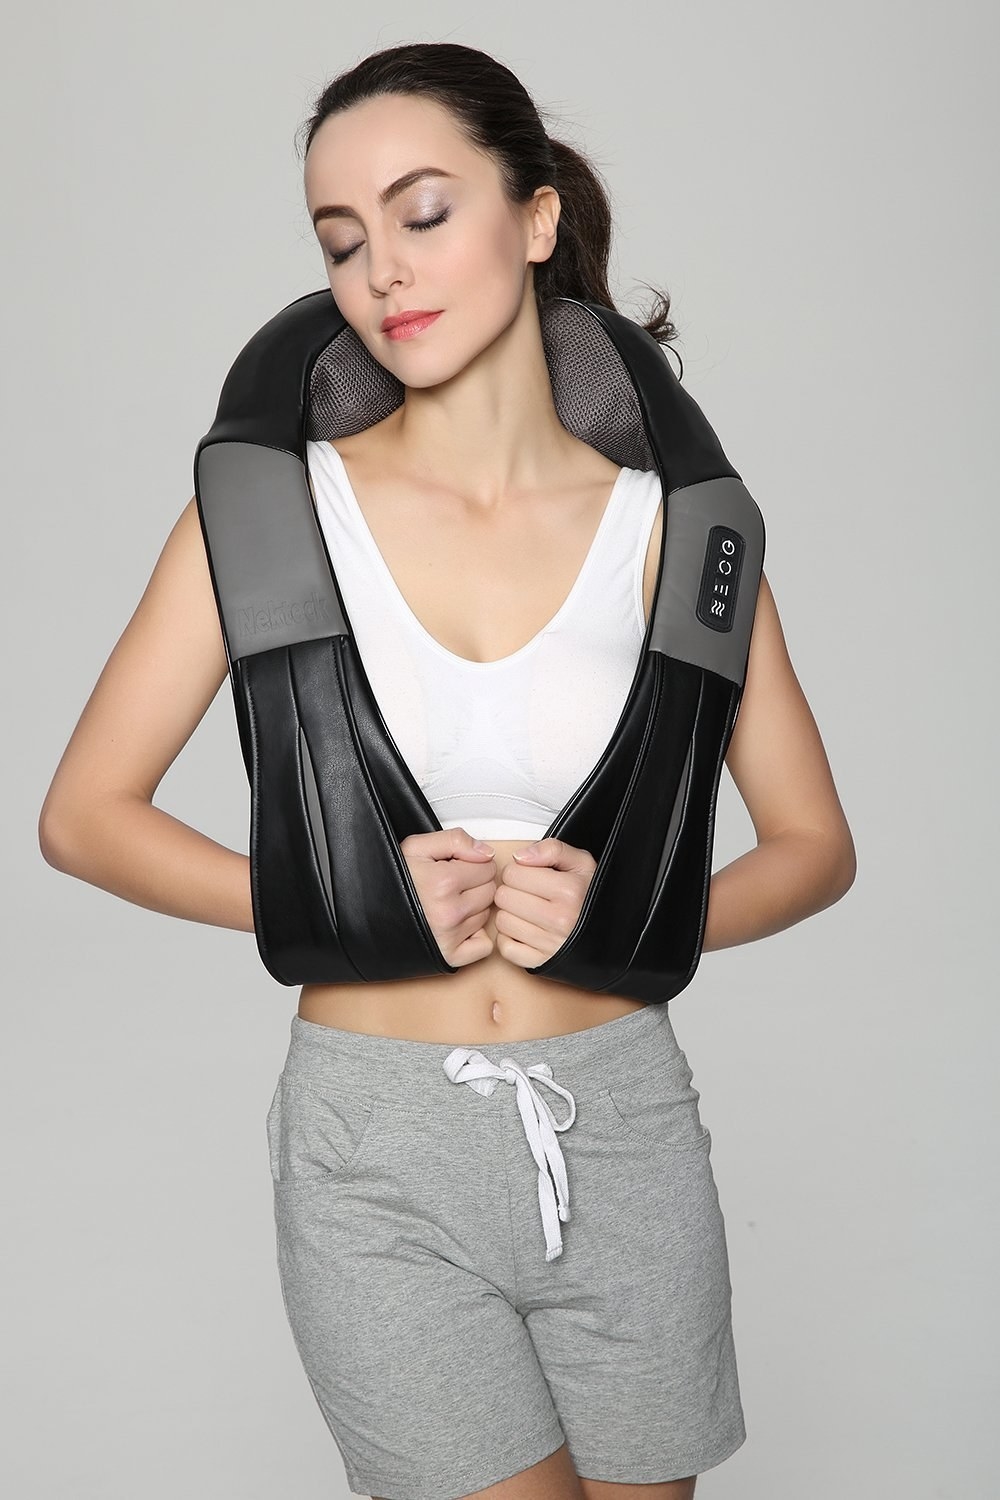 A model with the shoulder massage across their back and their arms in the straps in front of their body